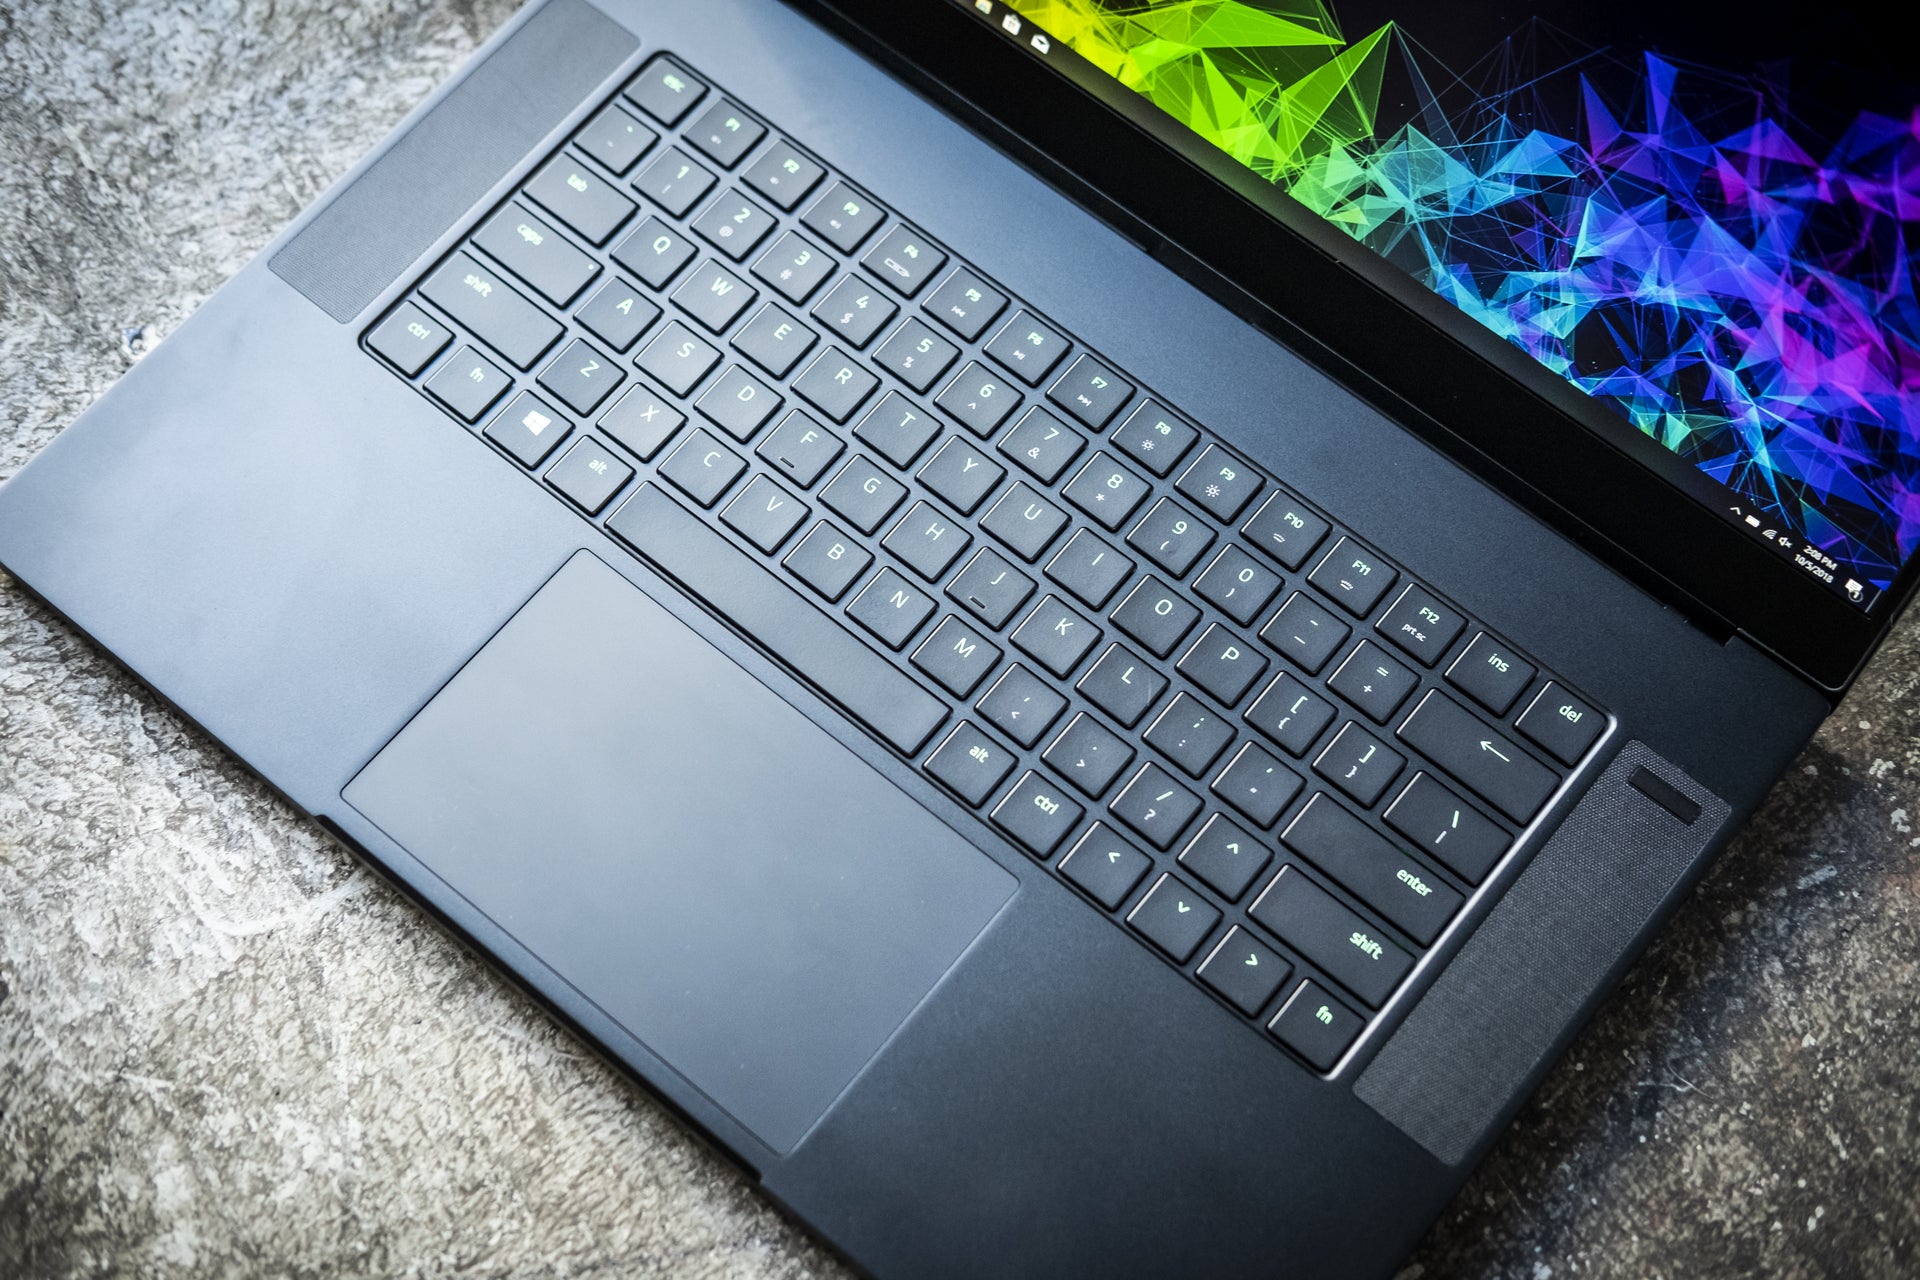 Razer Blade 15 Review: The world's smallest 15-inch gaming laptop packs